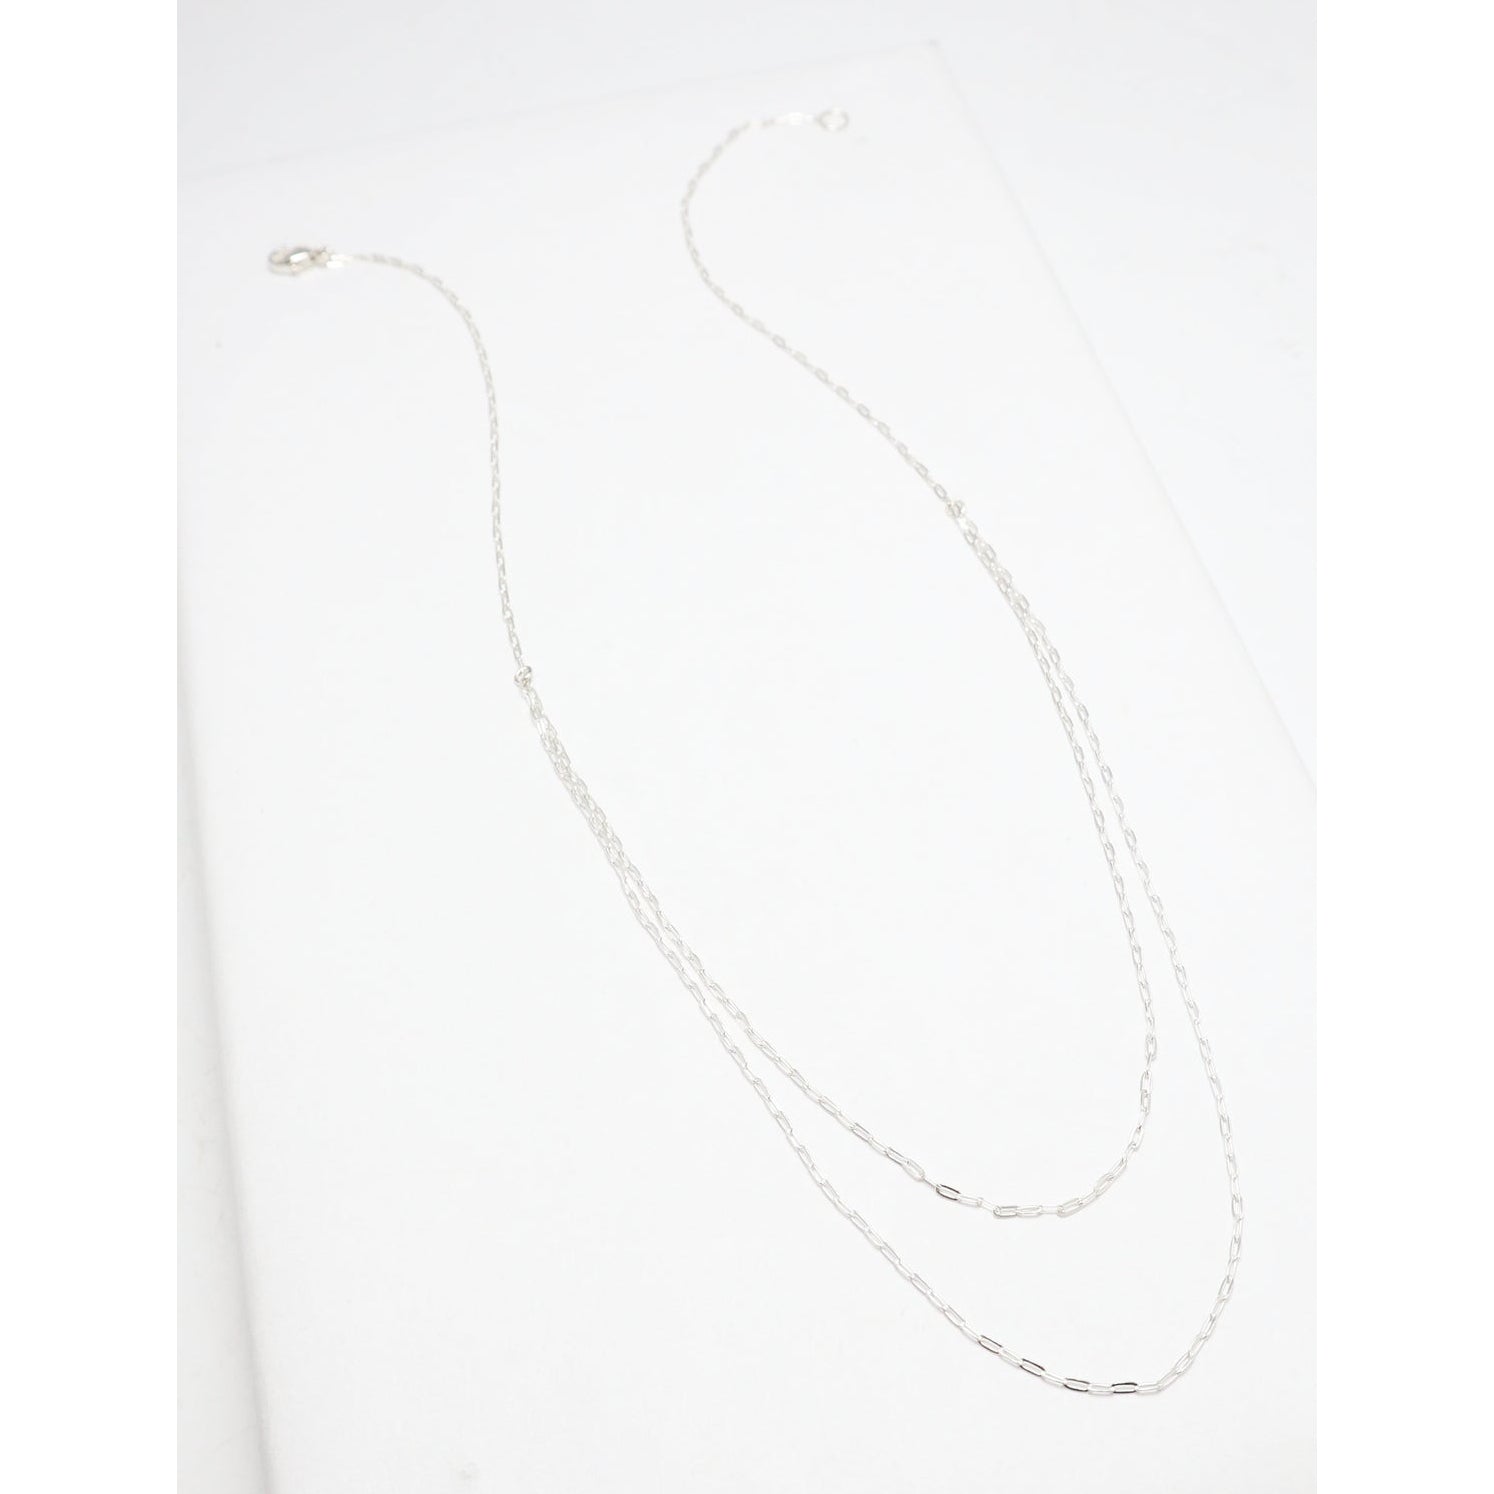 Darling Double-Layered Necklace